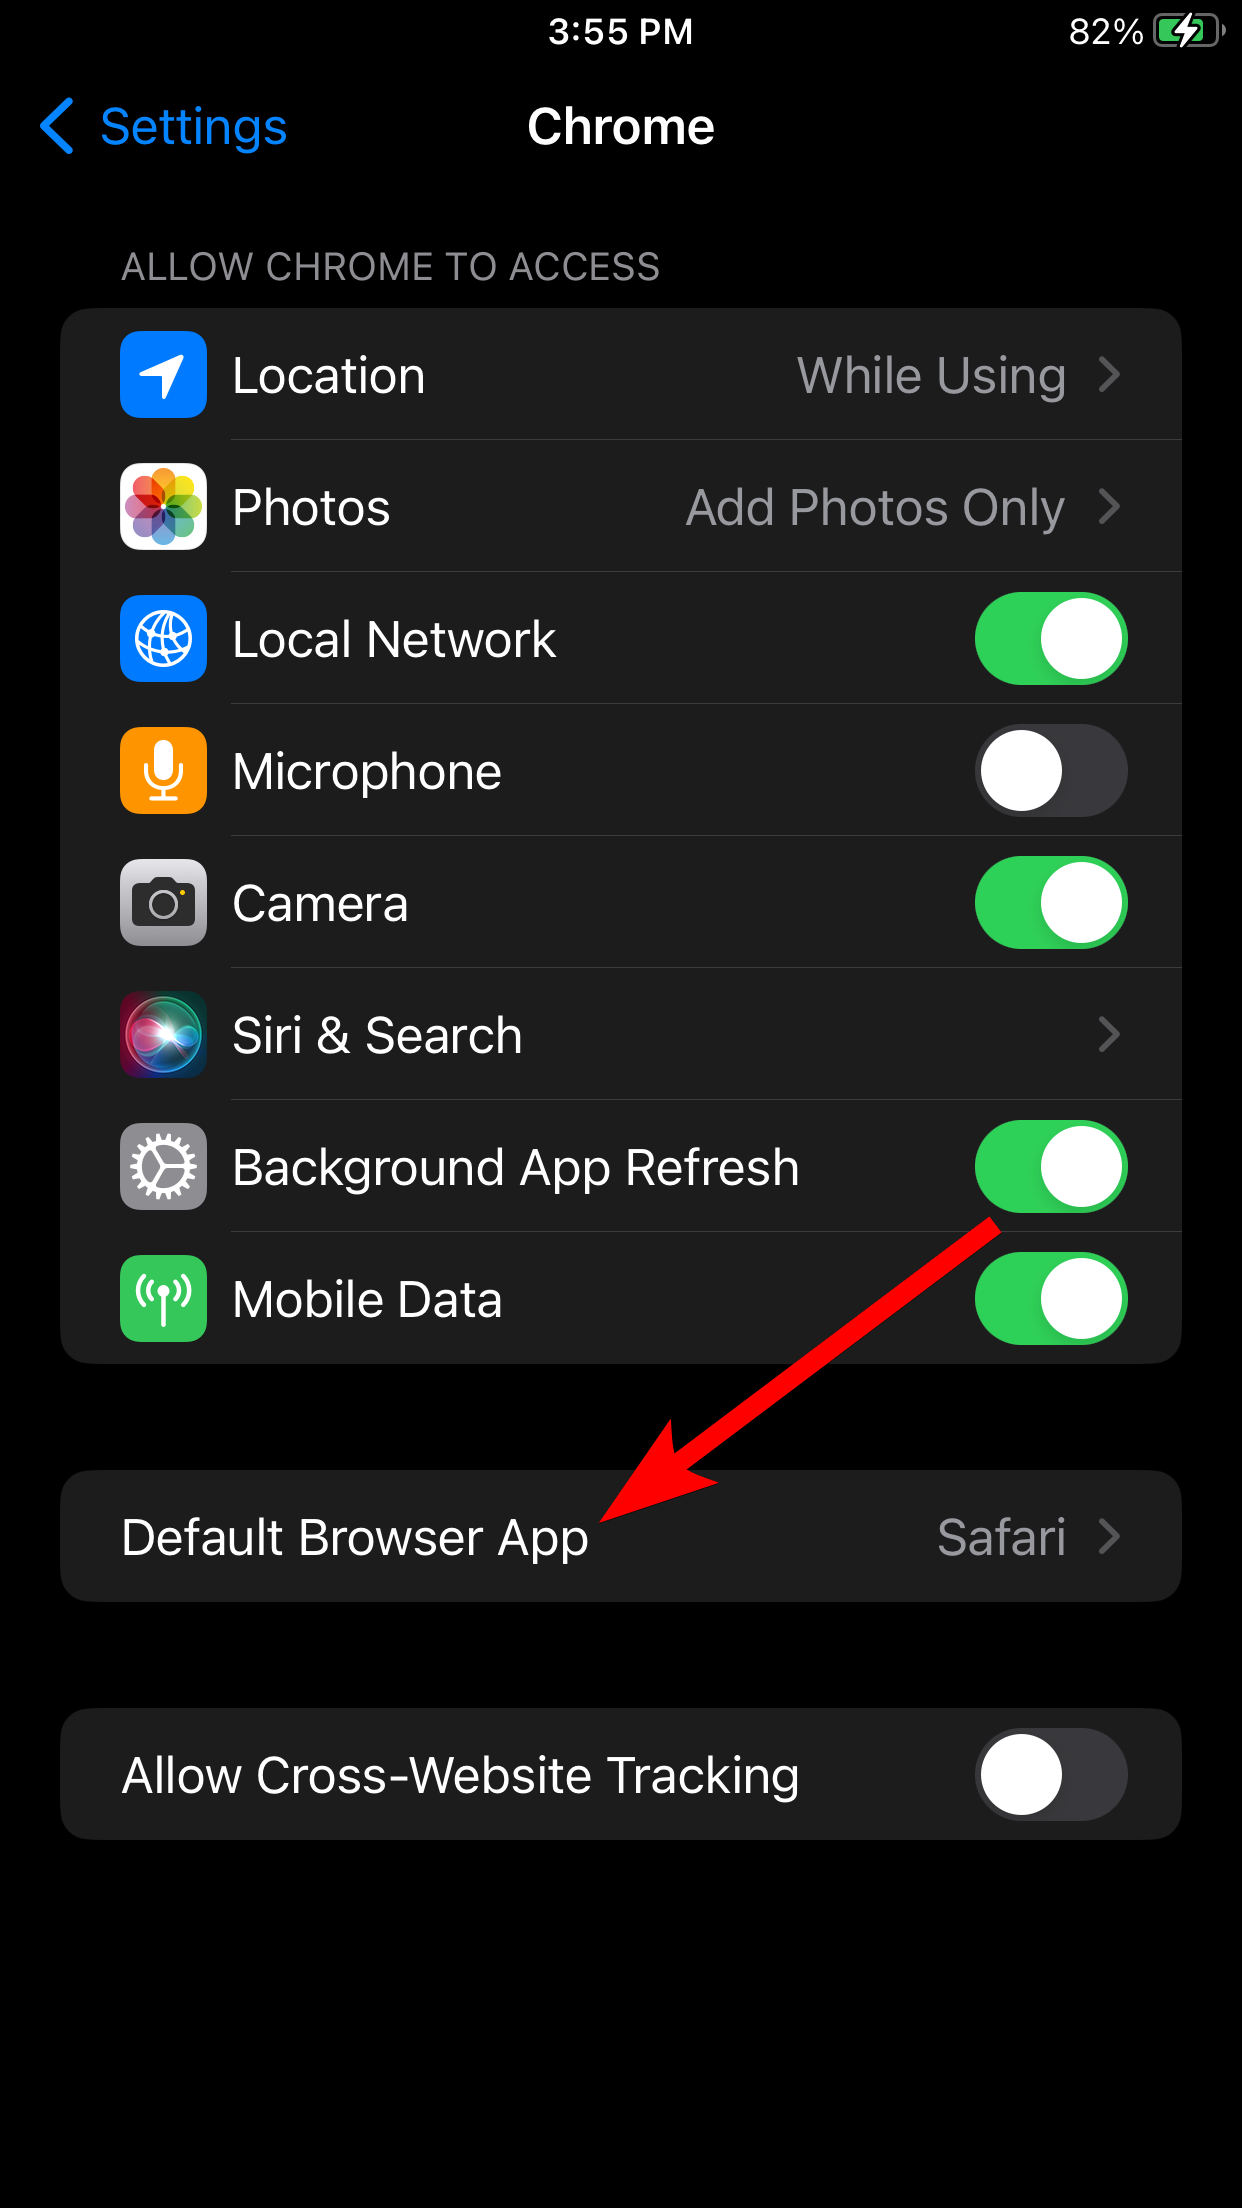 The Chrome settings page in the Settings app on iPhone.